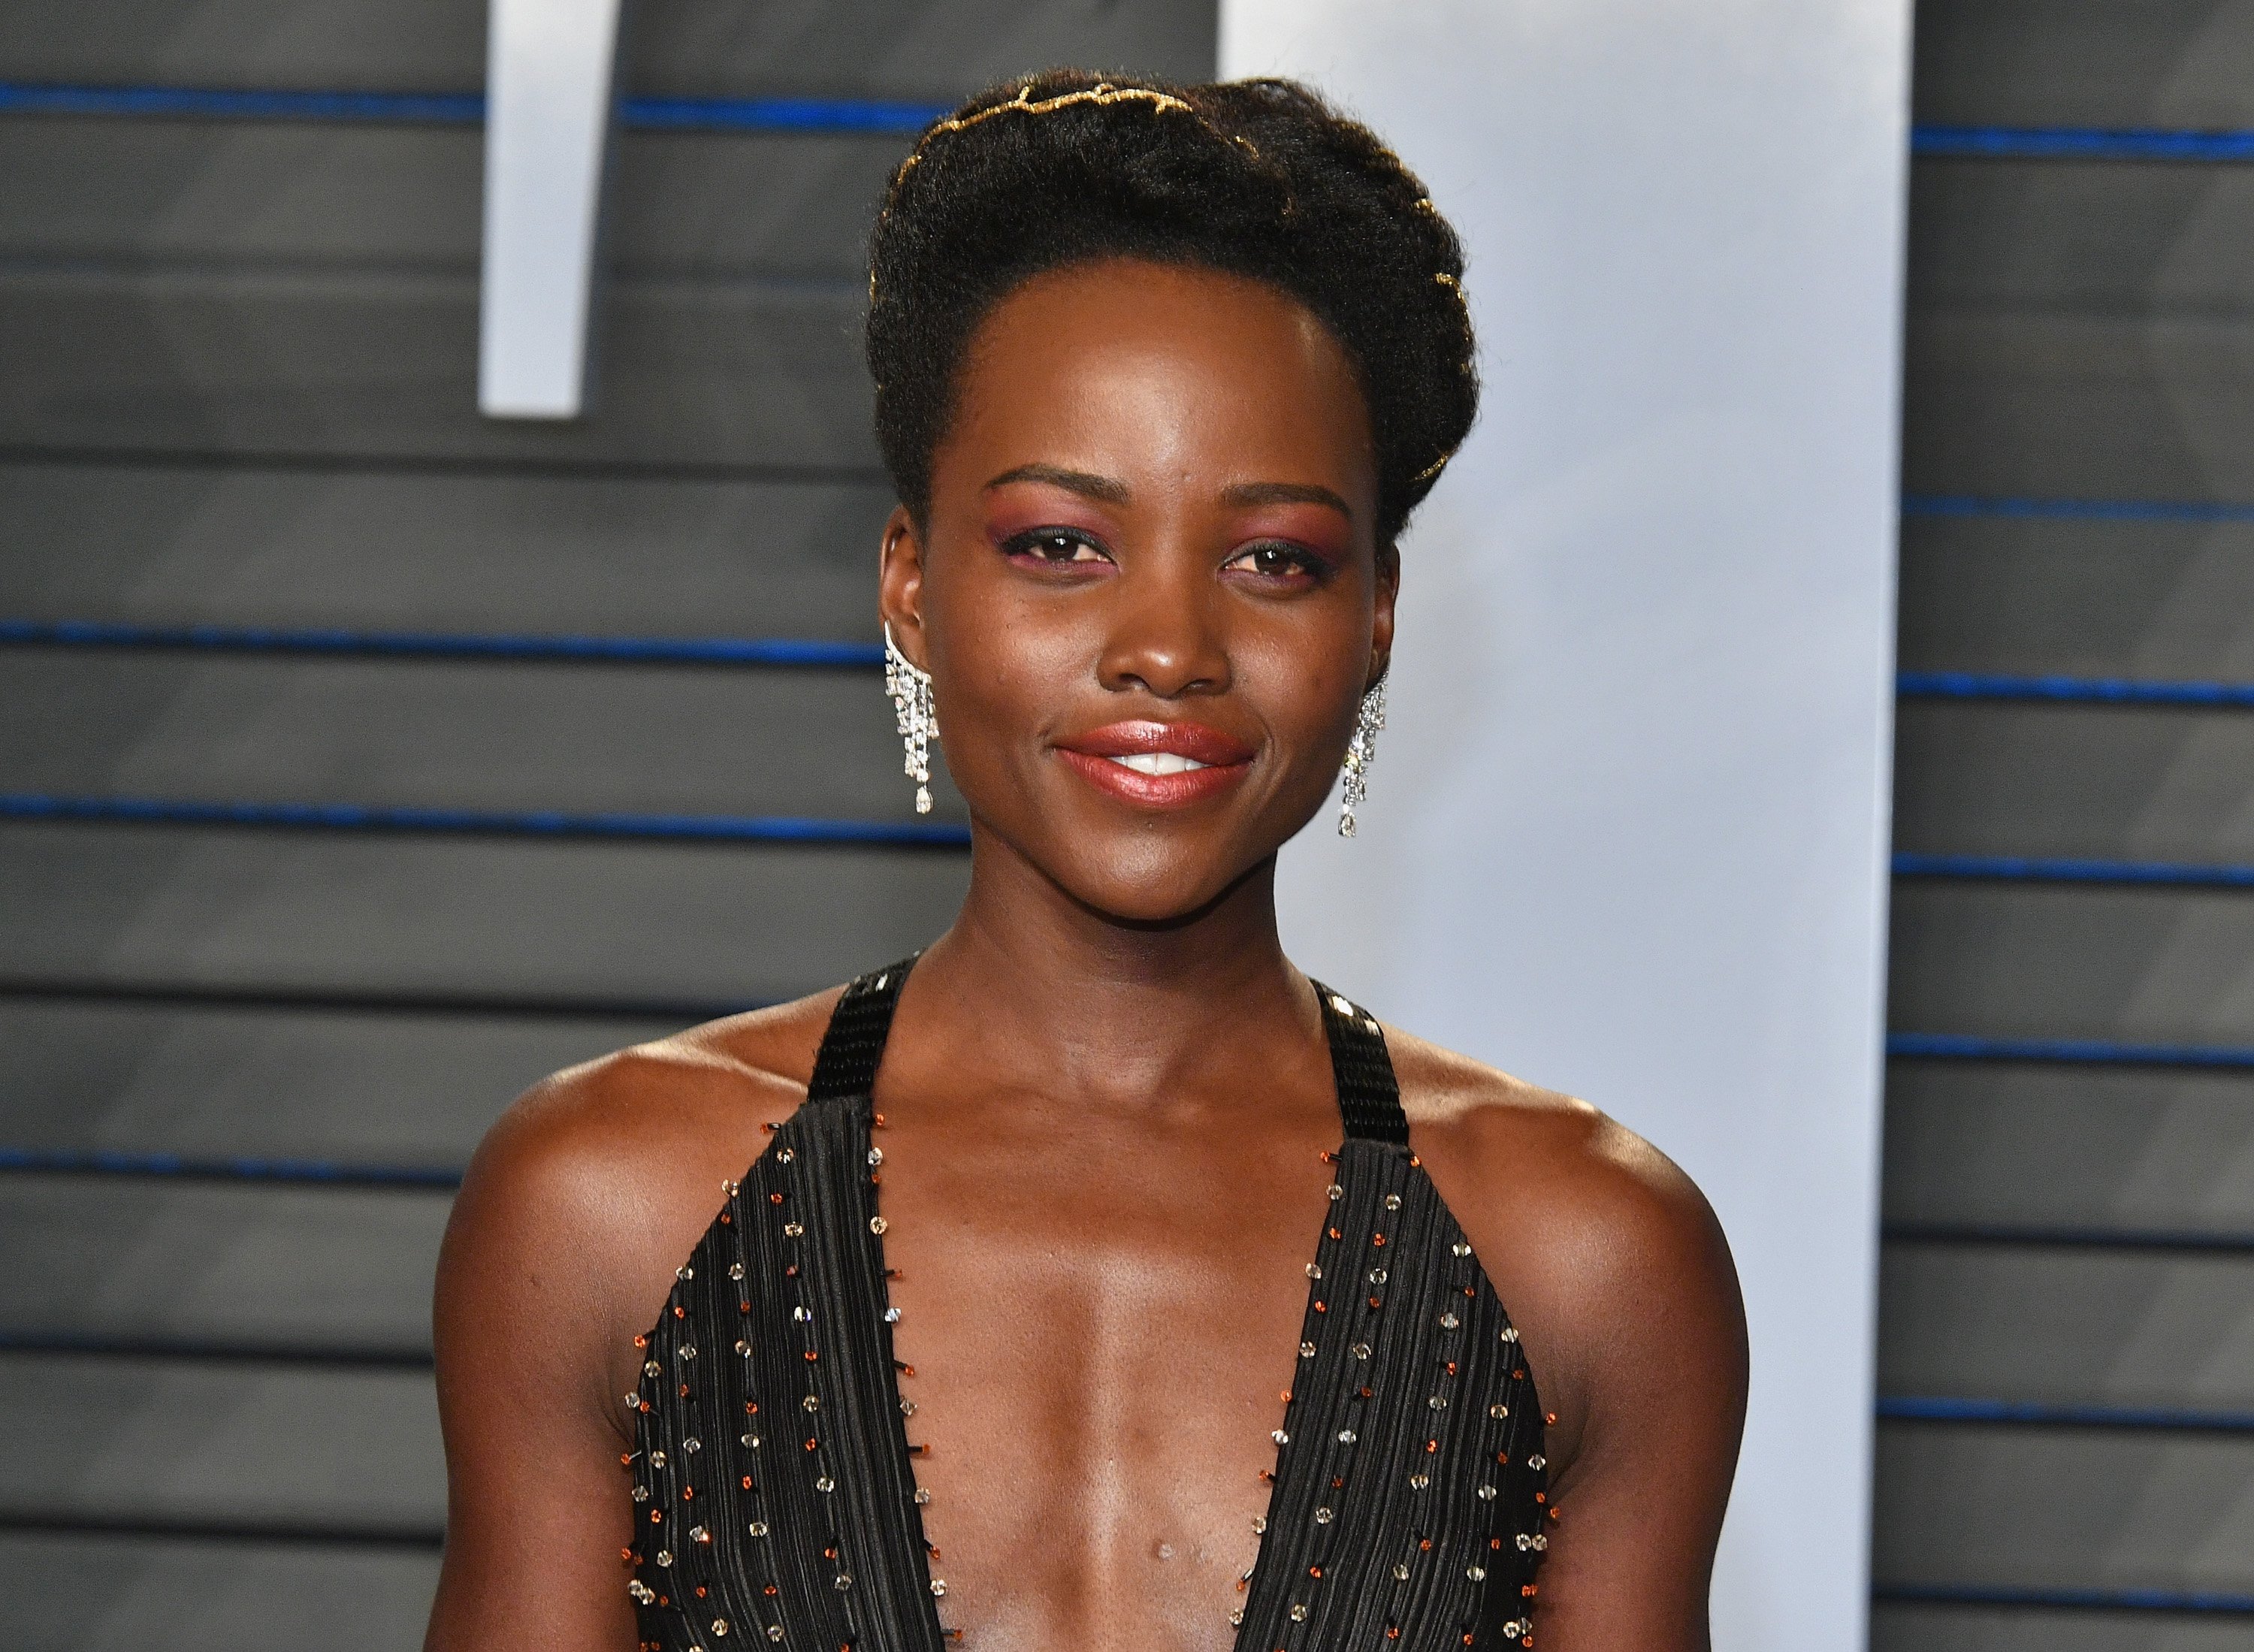 Lupita Nyong'o attends the Vanity Fair Oscar Party in Beverly Hills, California on March 4, 2018. | Source: Getty Images